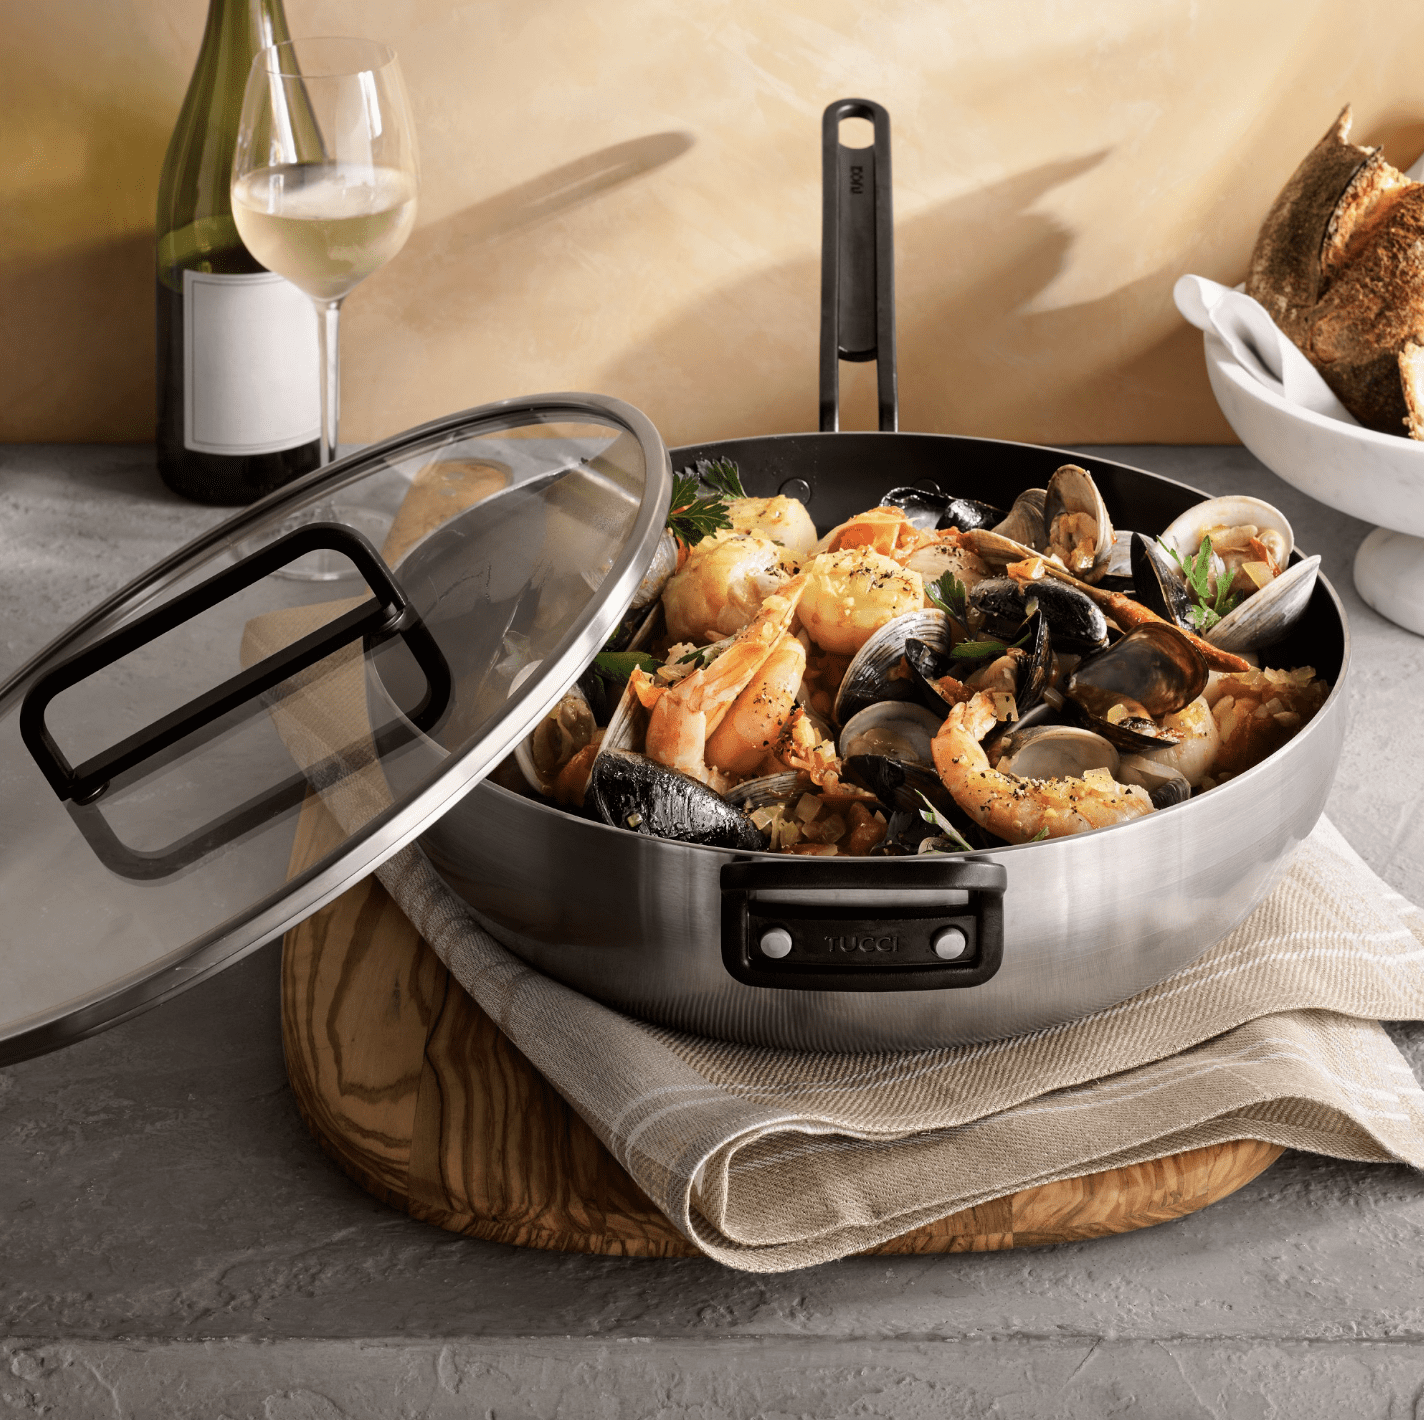 Oprah and Gordon Ramsay adore this hybrid cookware that's over 30% off for  Prime Day 2!